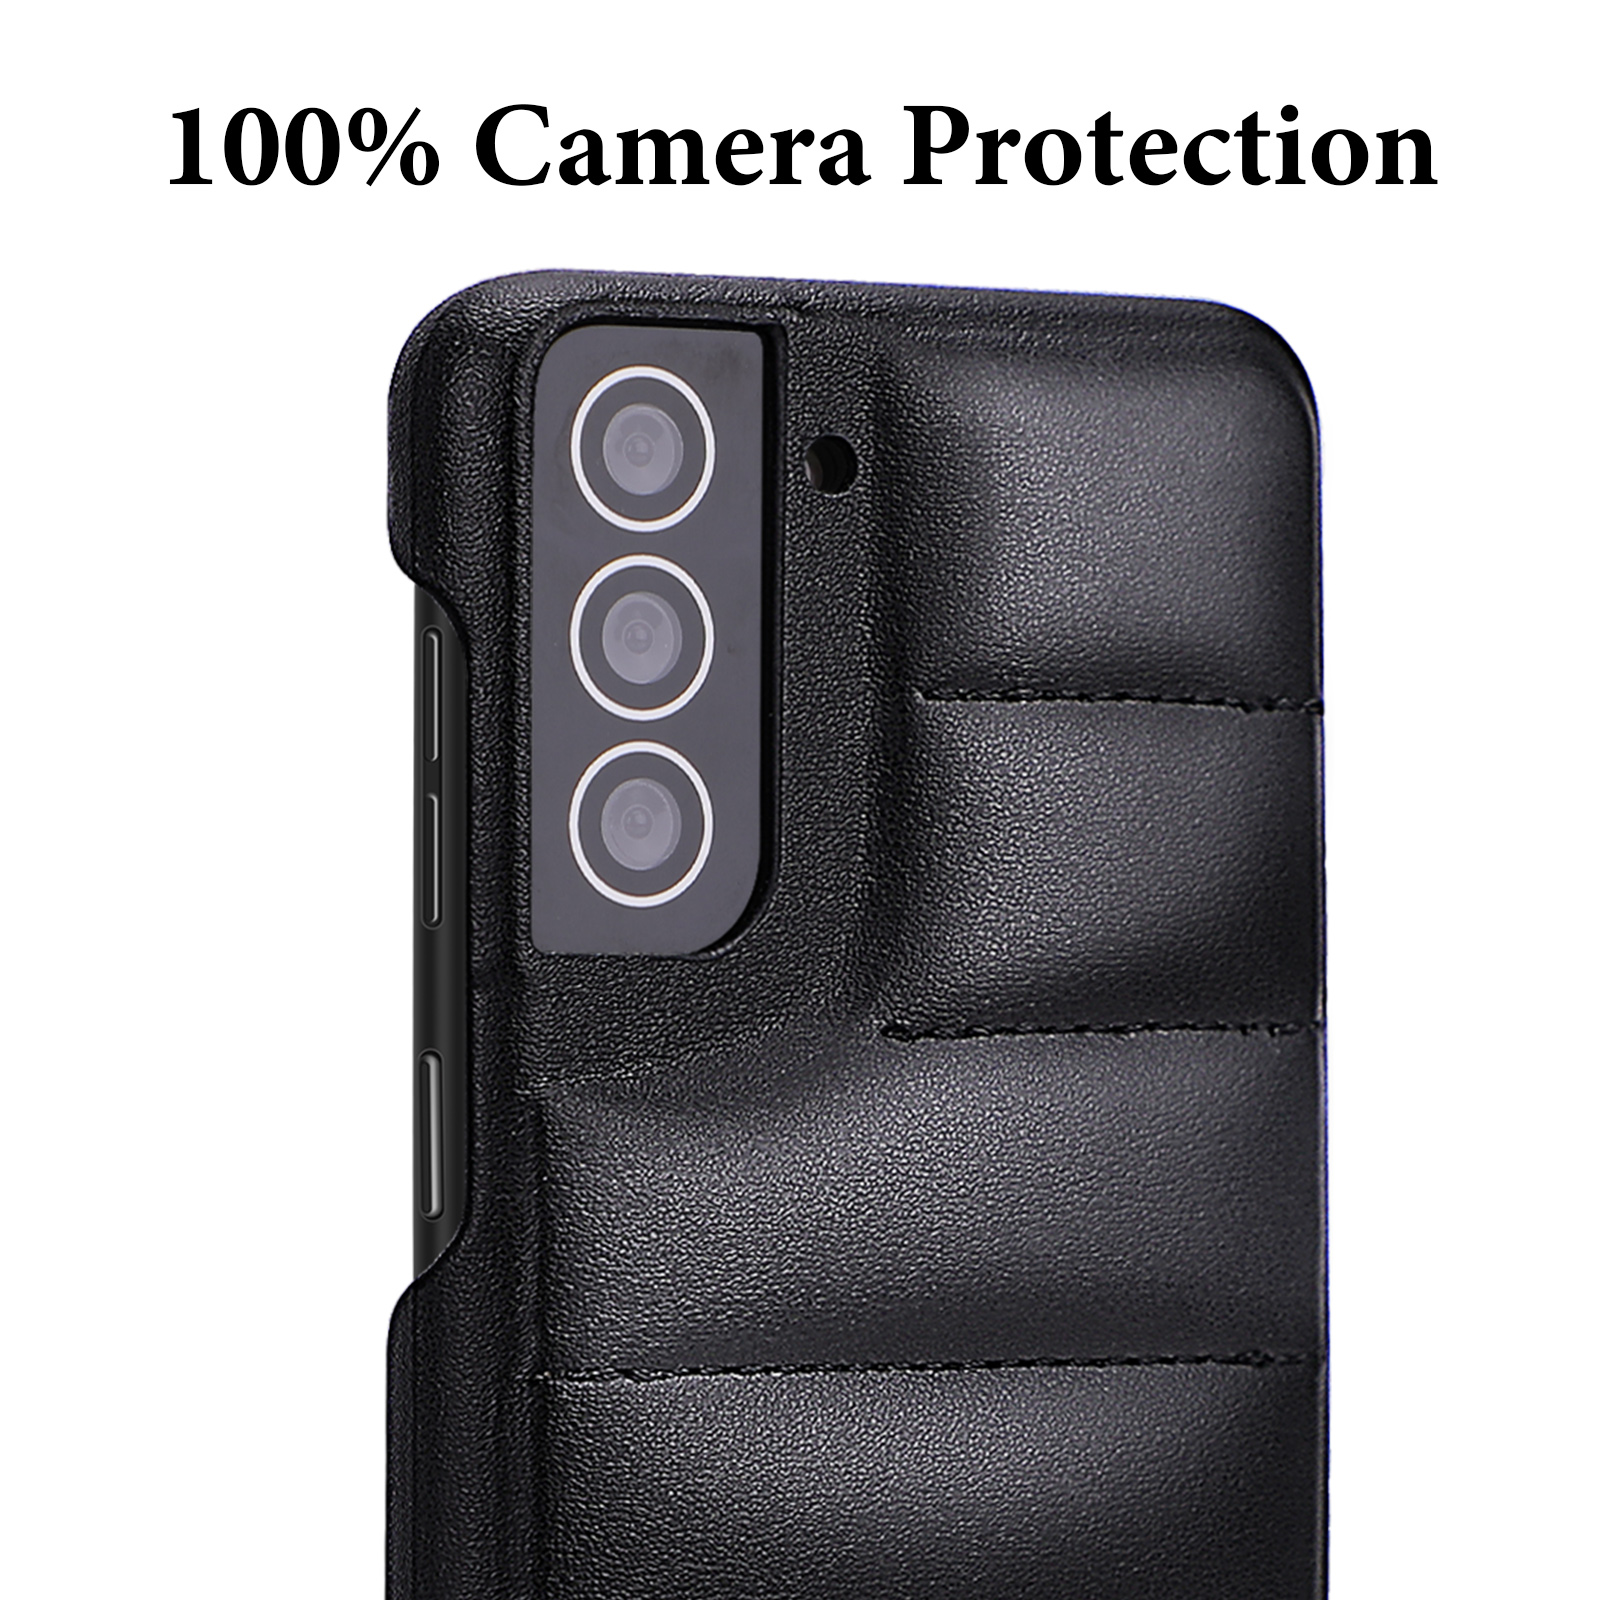 Hot Off for Samsung Galaxy S21 Case, Nappa Leather Puffer Phone Case, Galaxy S21 Case [Full Body Protection] [Non-Slip] Shockproof Protective Phone Case, Black for Galaxy S21 - image 3 of 5